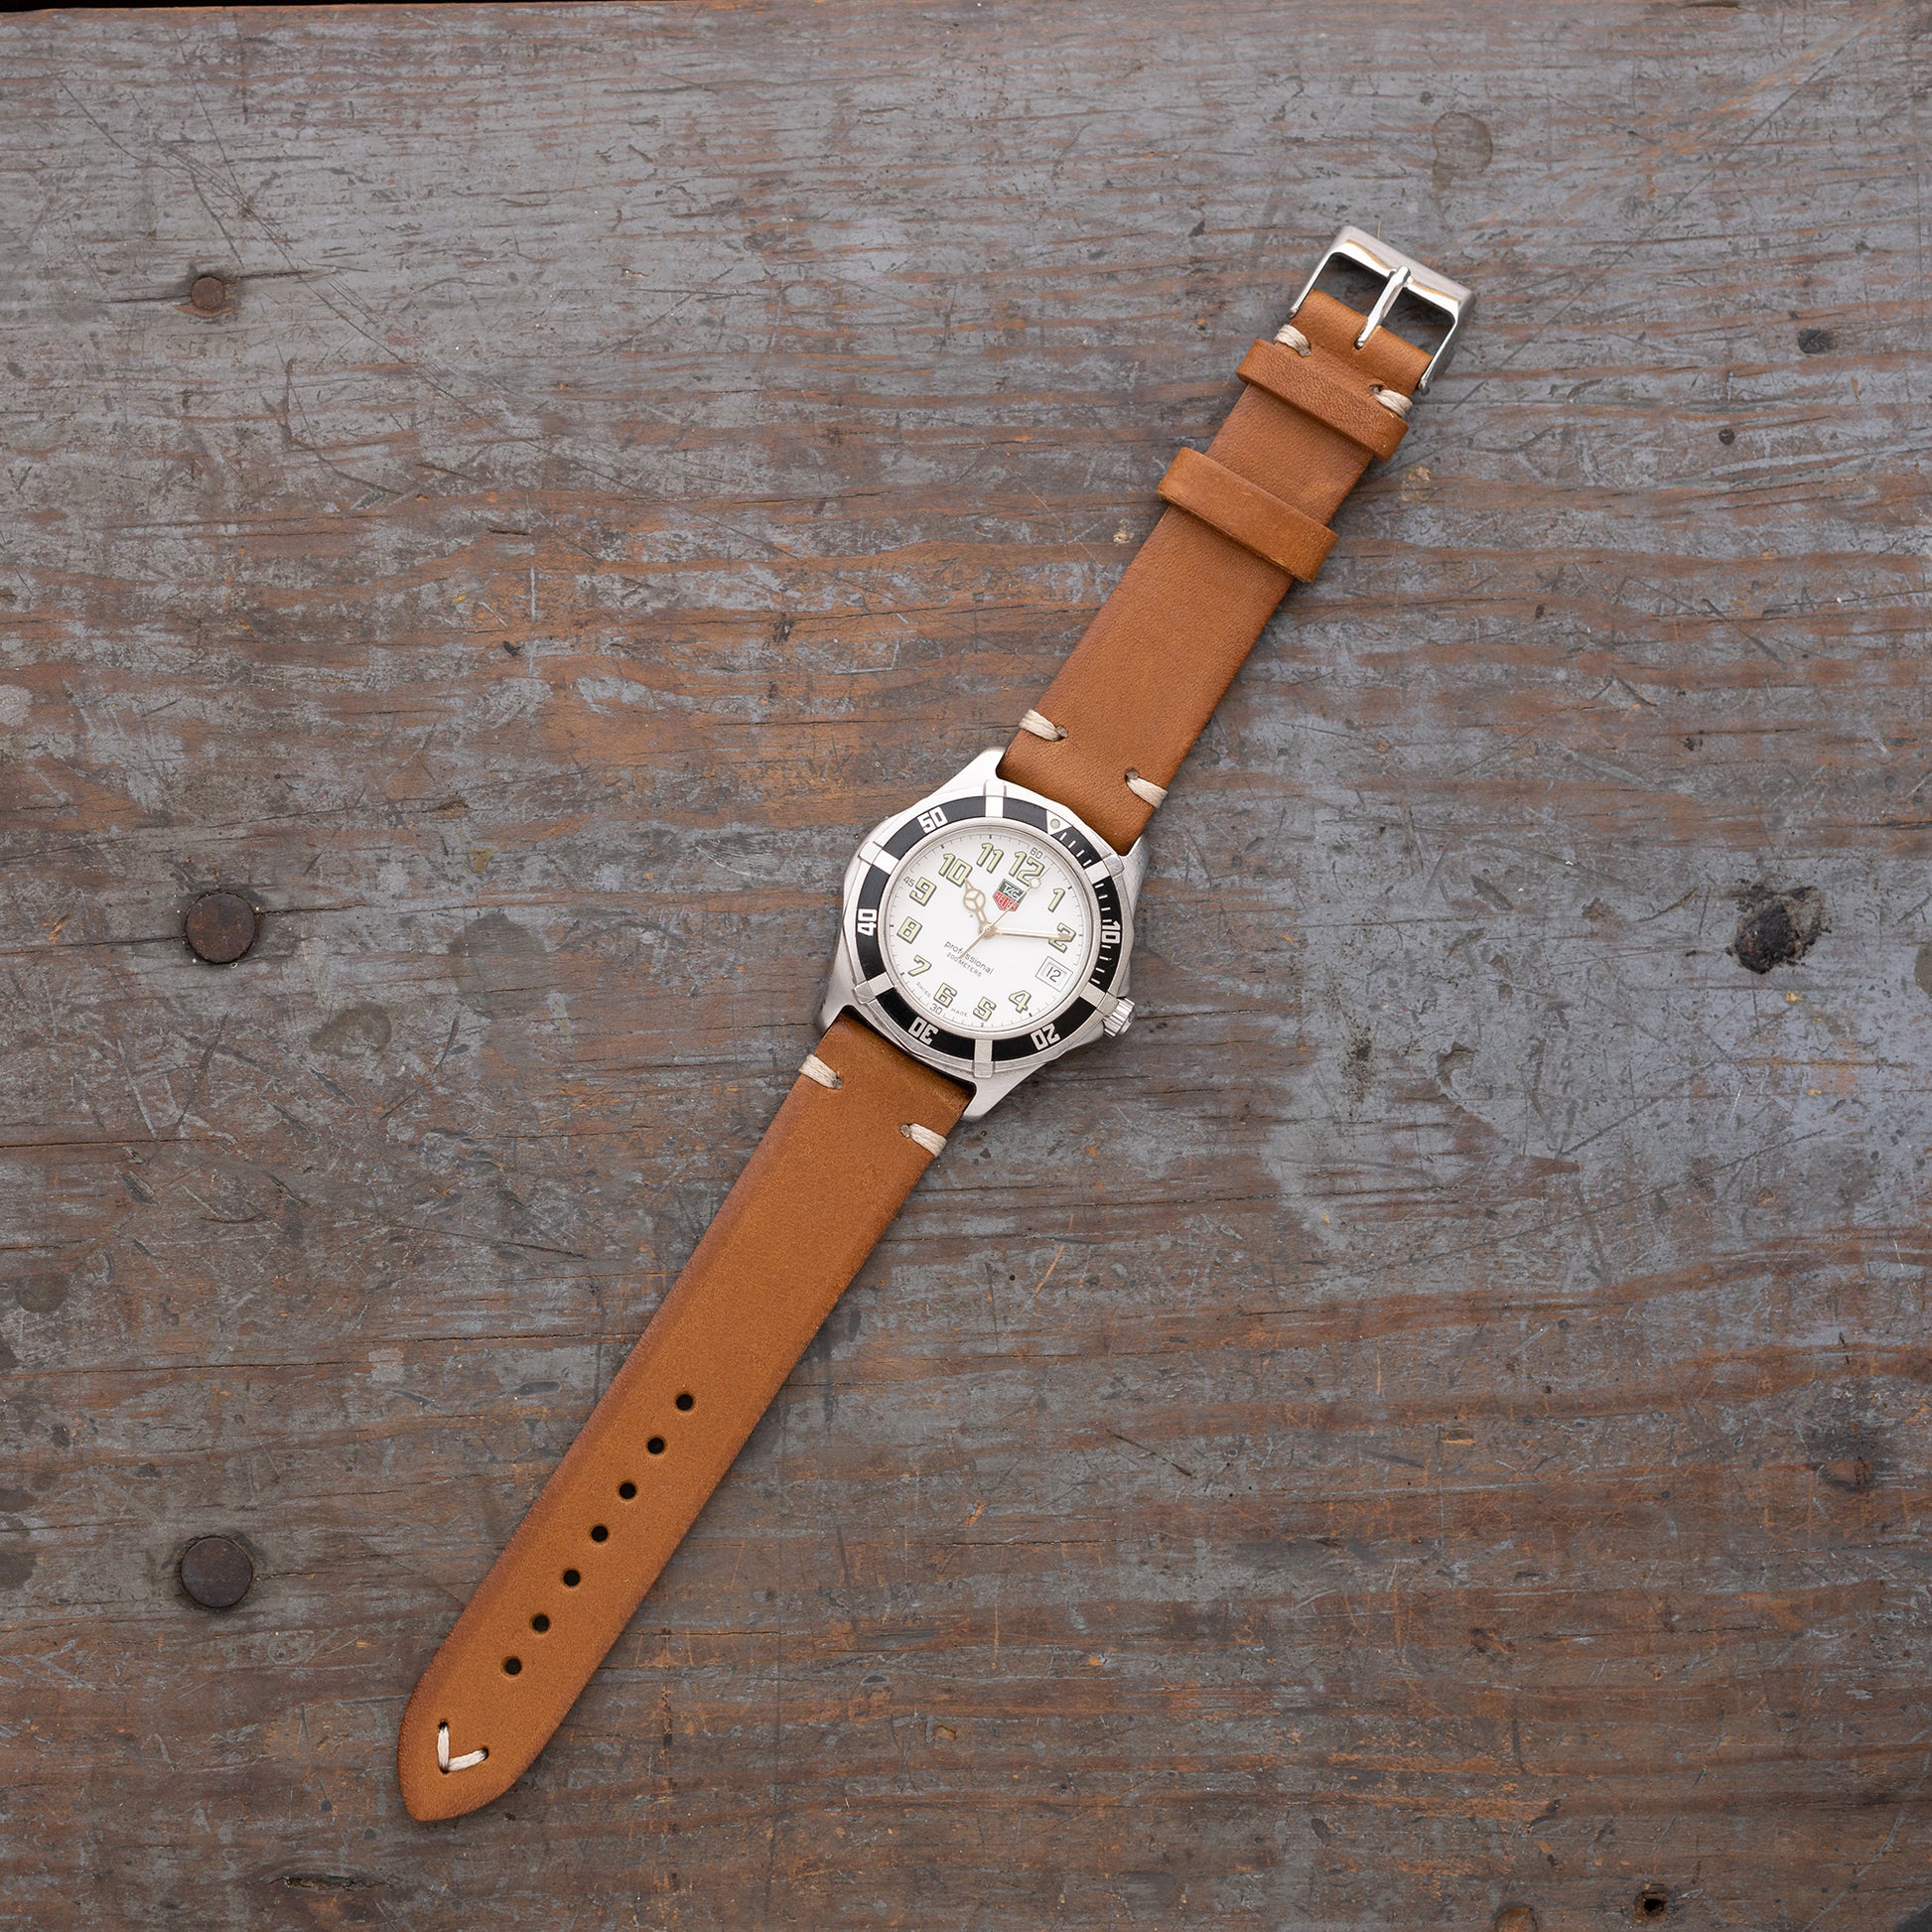 vintage leather watch strap made of full grain Italian leather in saddle tan color by Jackson Wayne 